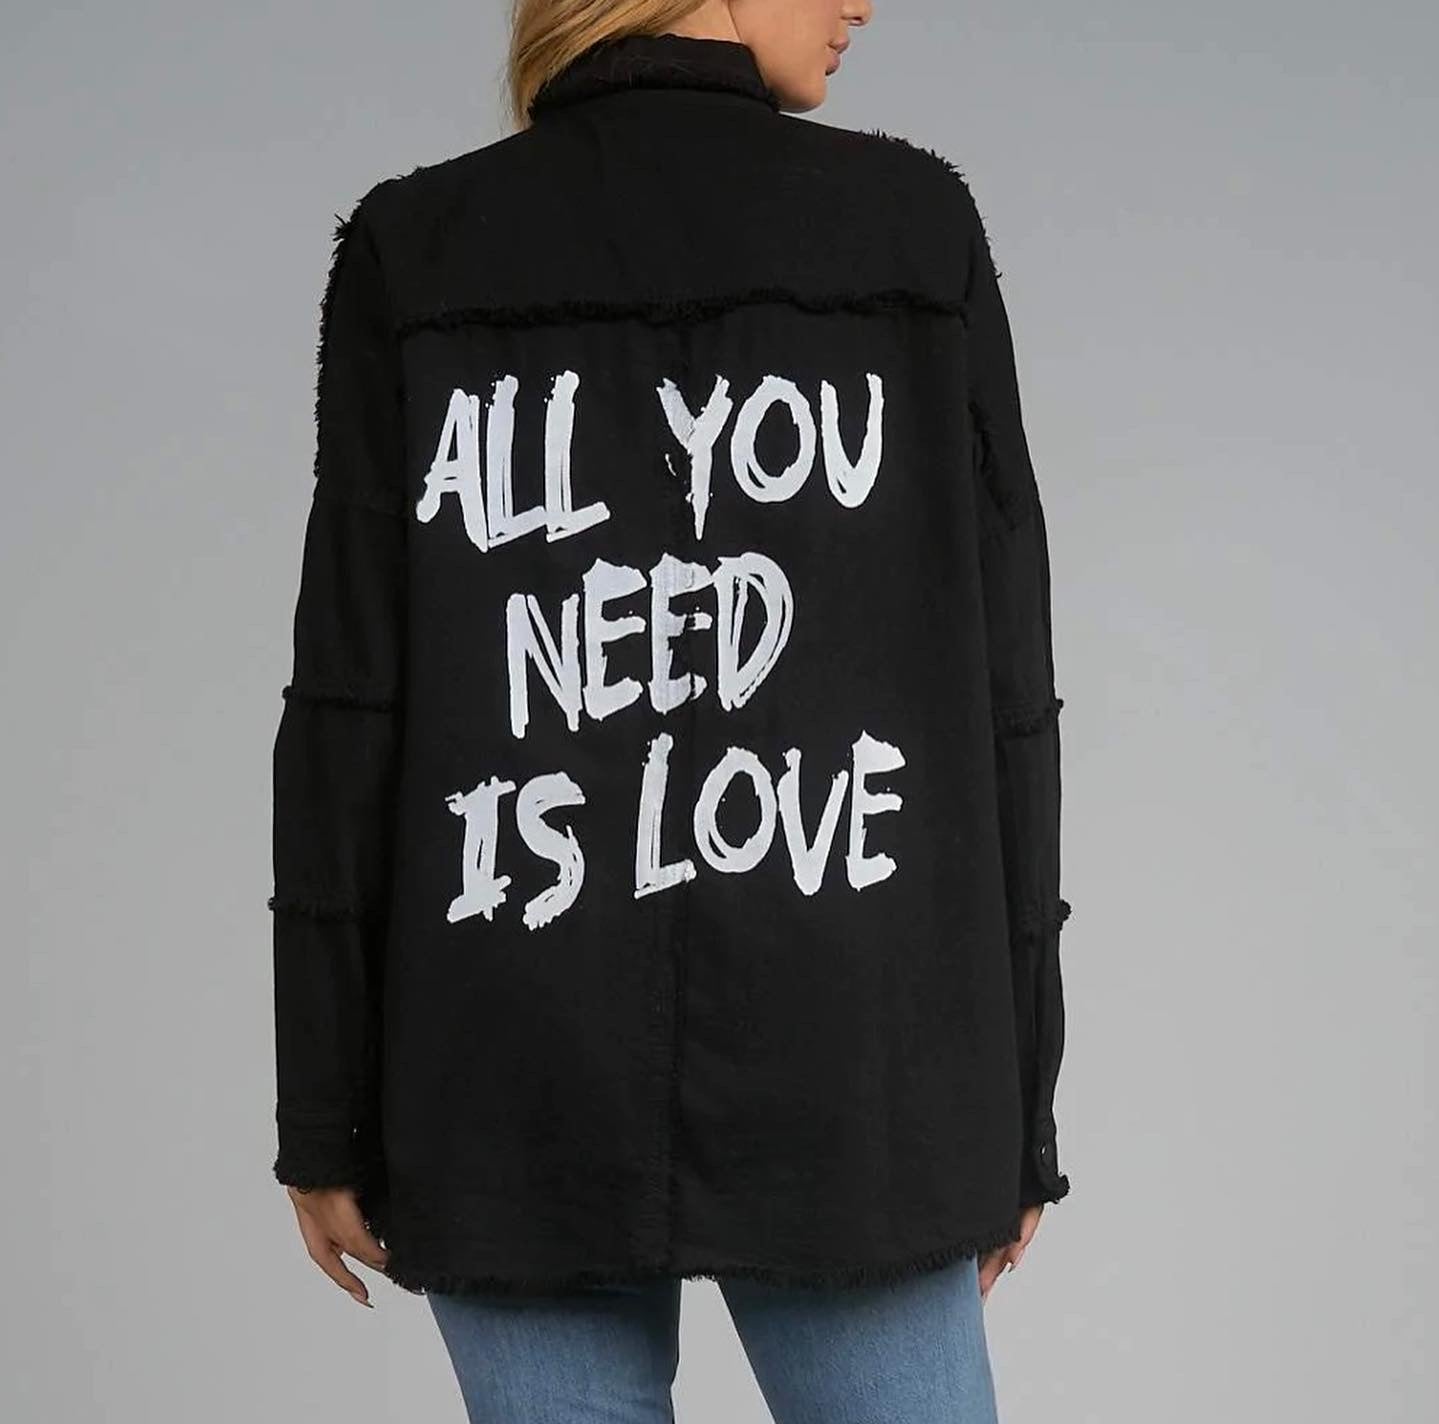 Elan All You Need is Love Jacket Dilaru Boutique Nutley New Jersey